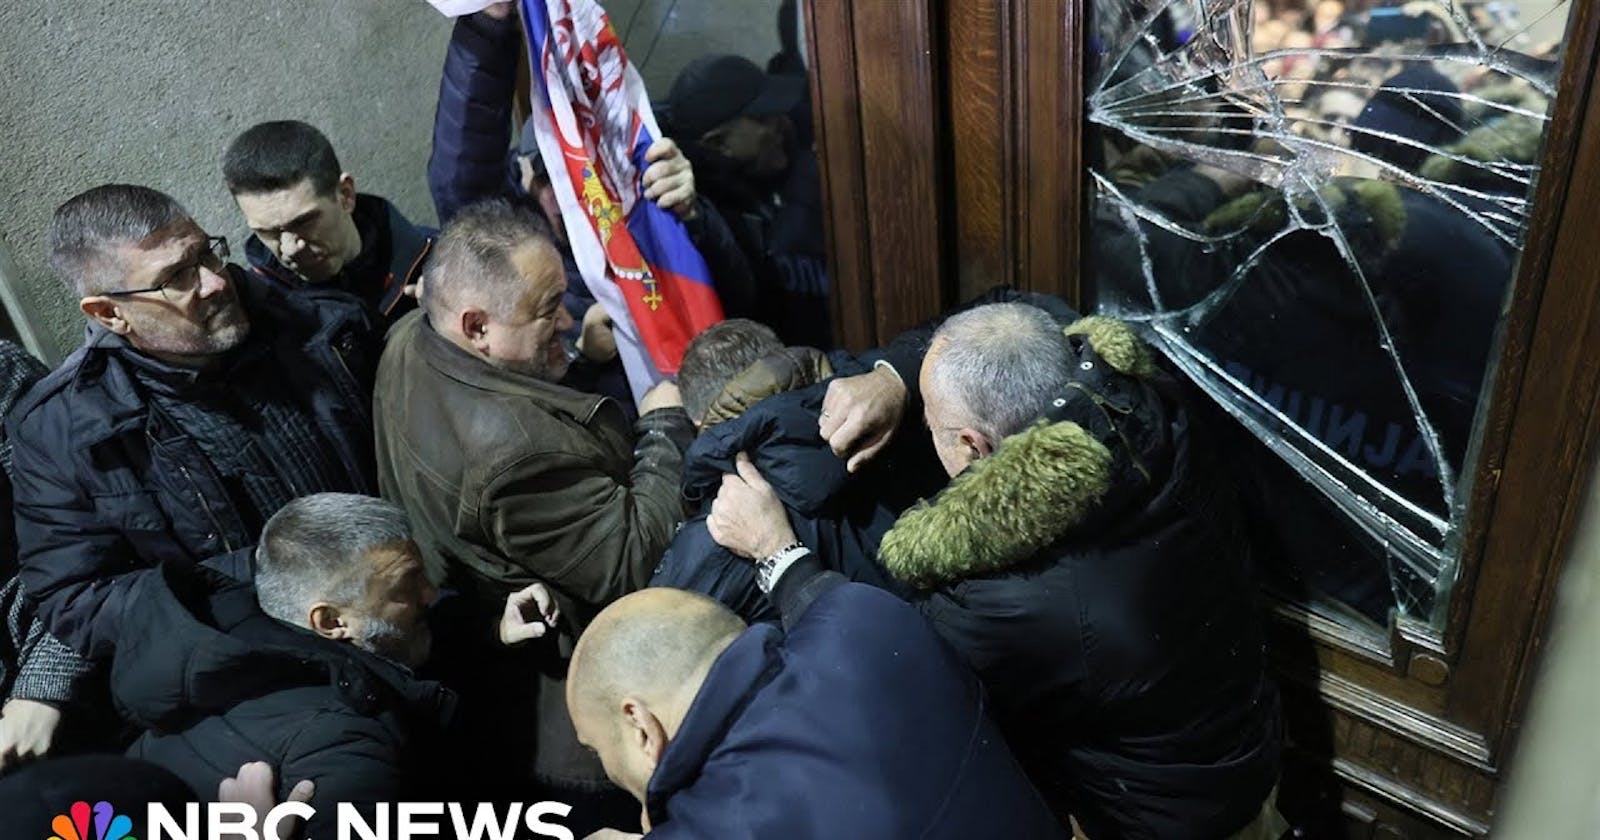 Demonstrators try to storm Belgrade city hall in protest against ‘stolen’ Serbian elections